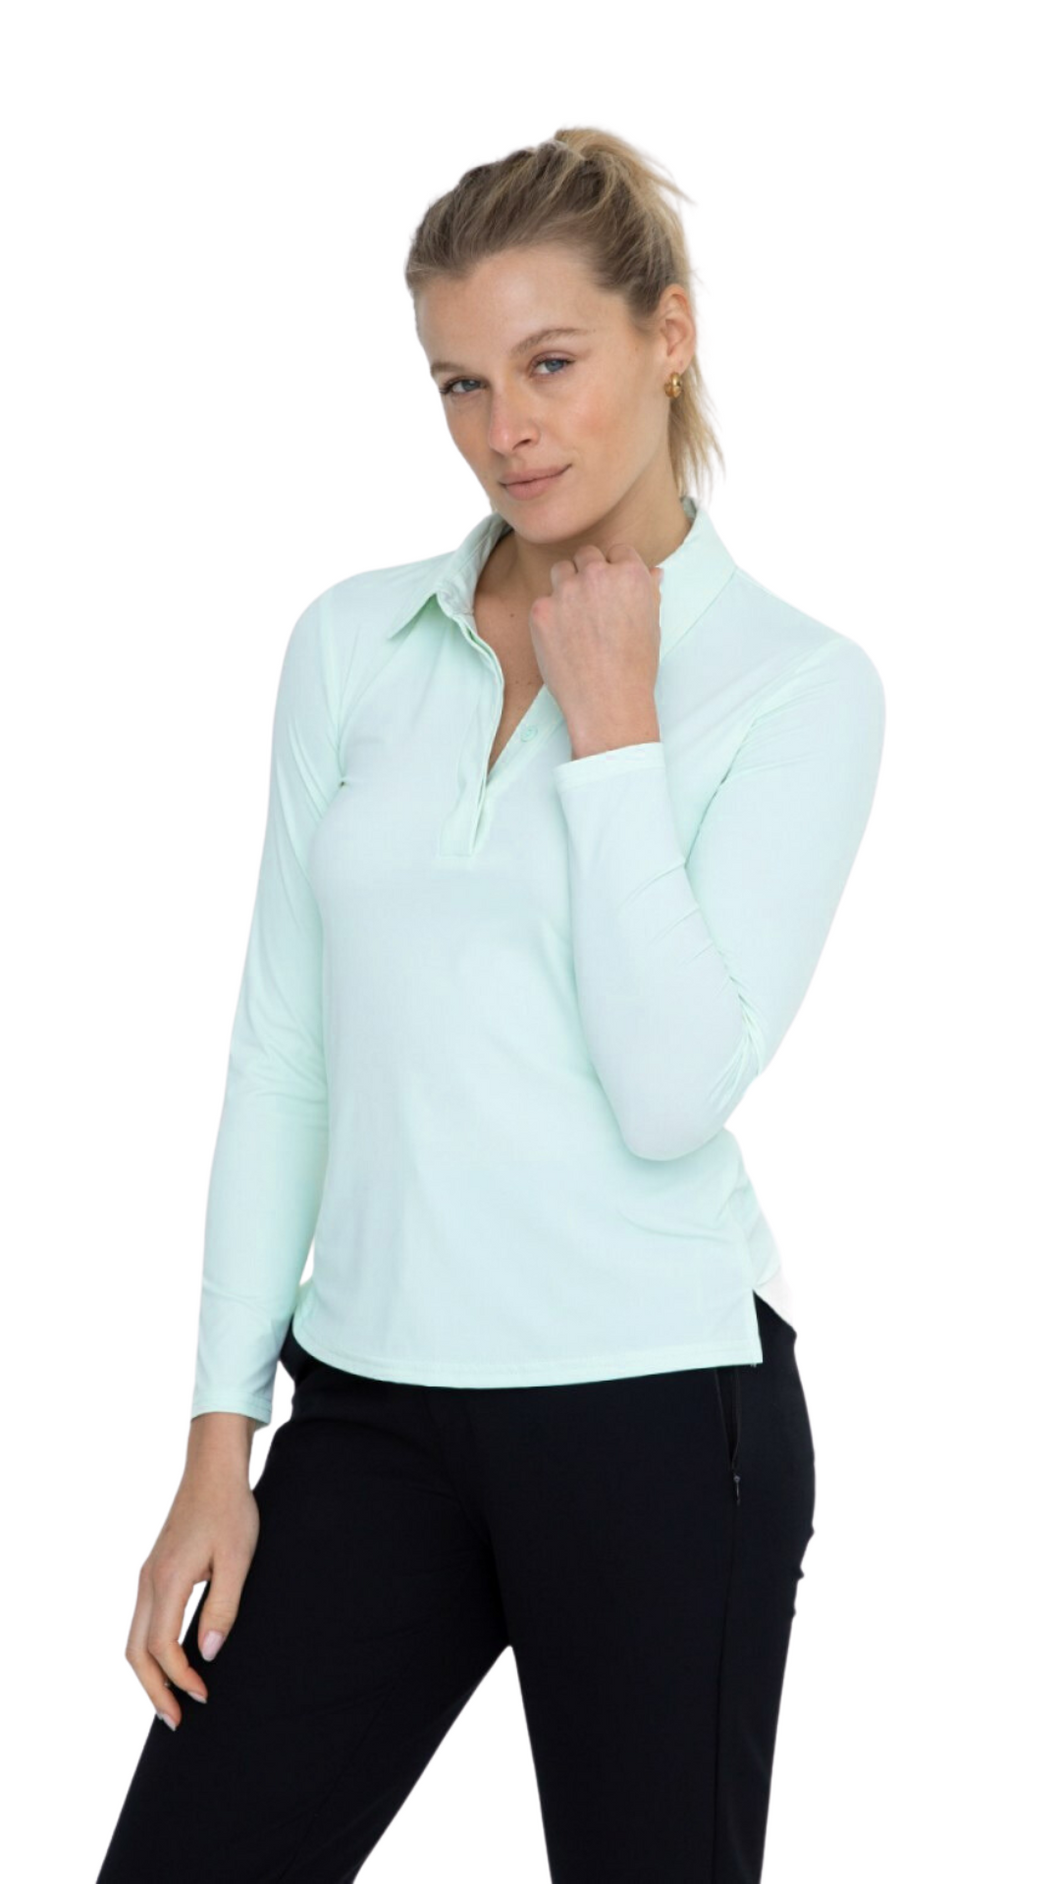 FREE MB LONG SLEEVES ACTIVE POLO MINT